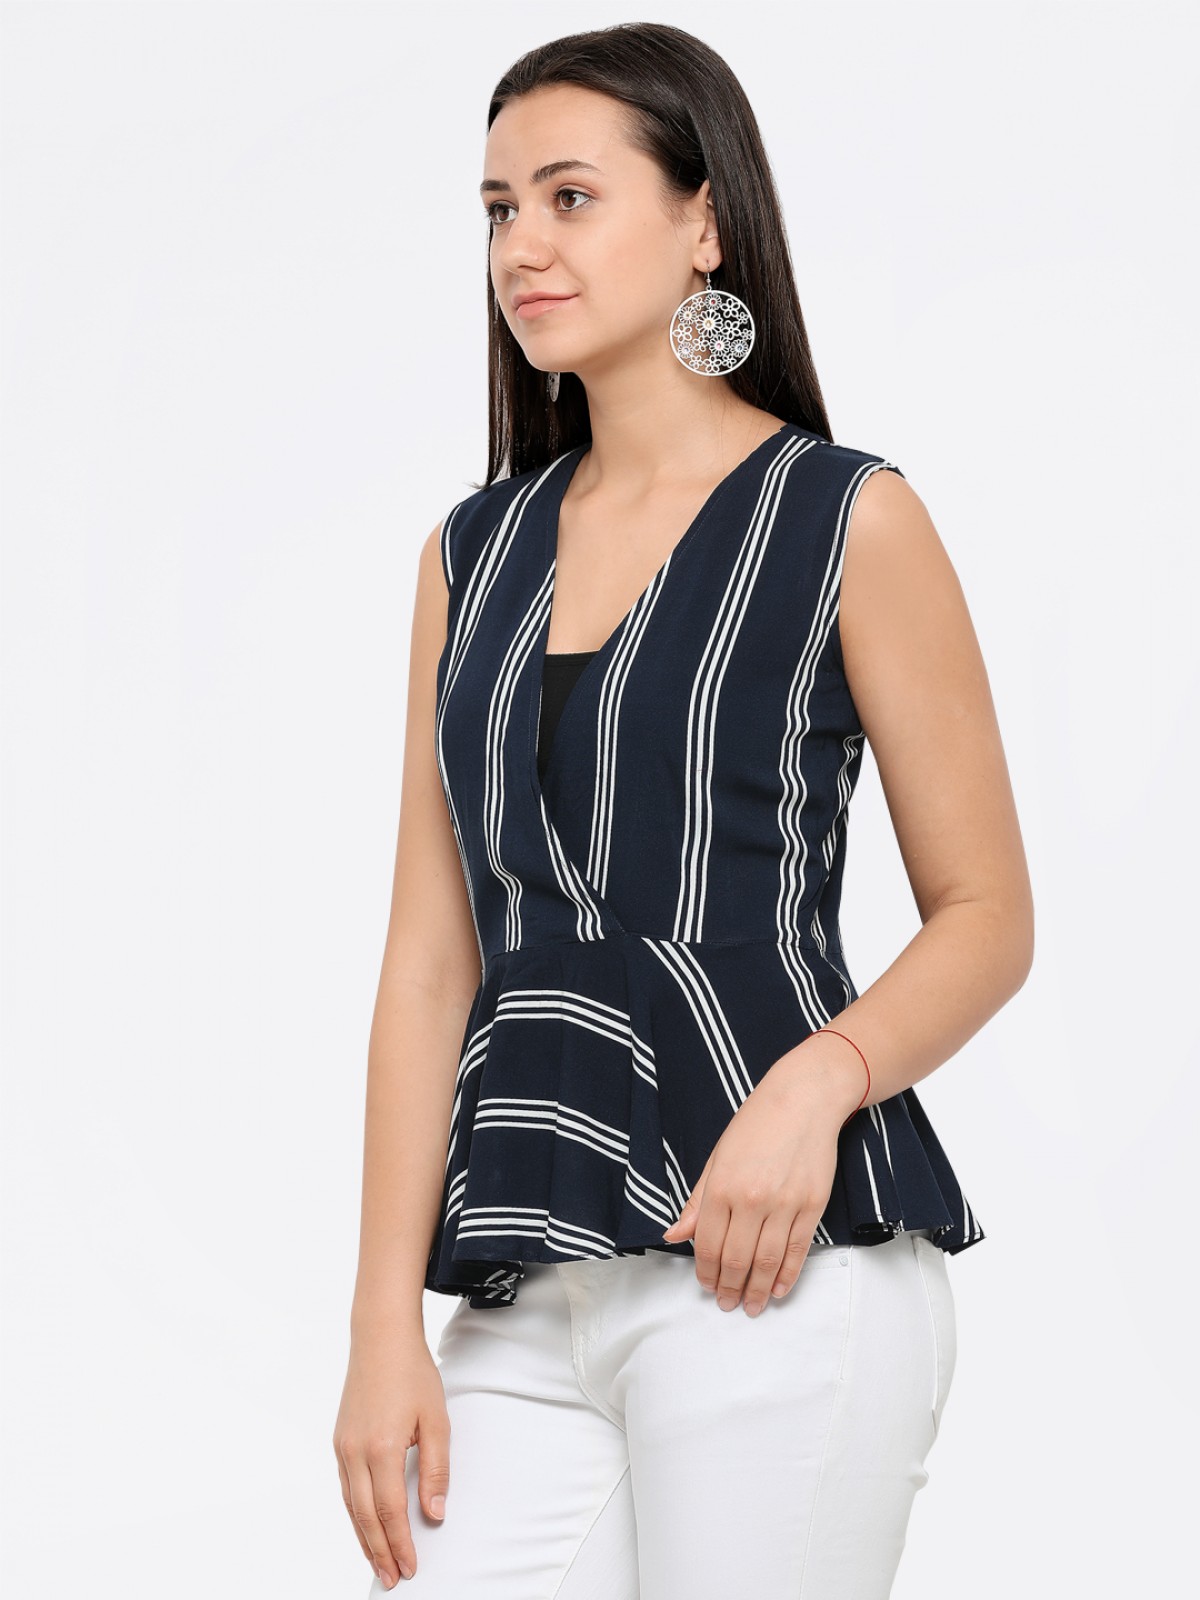 Blue White Lined Casual Office Wear Peplum Top